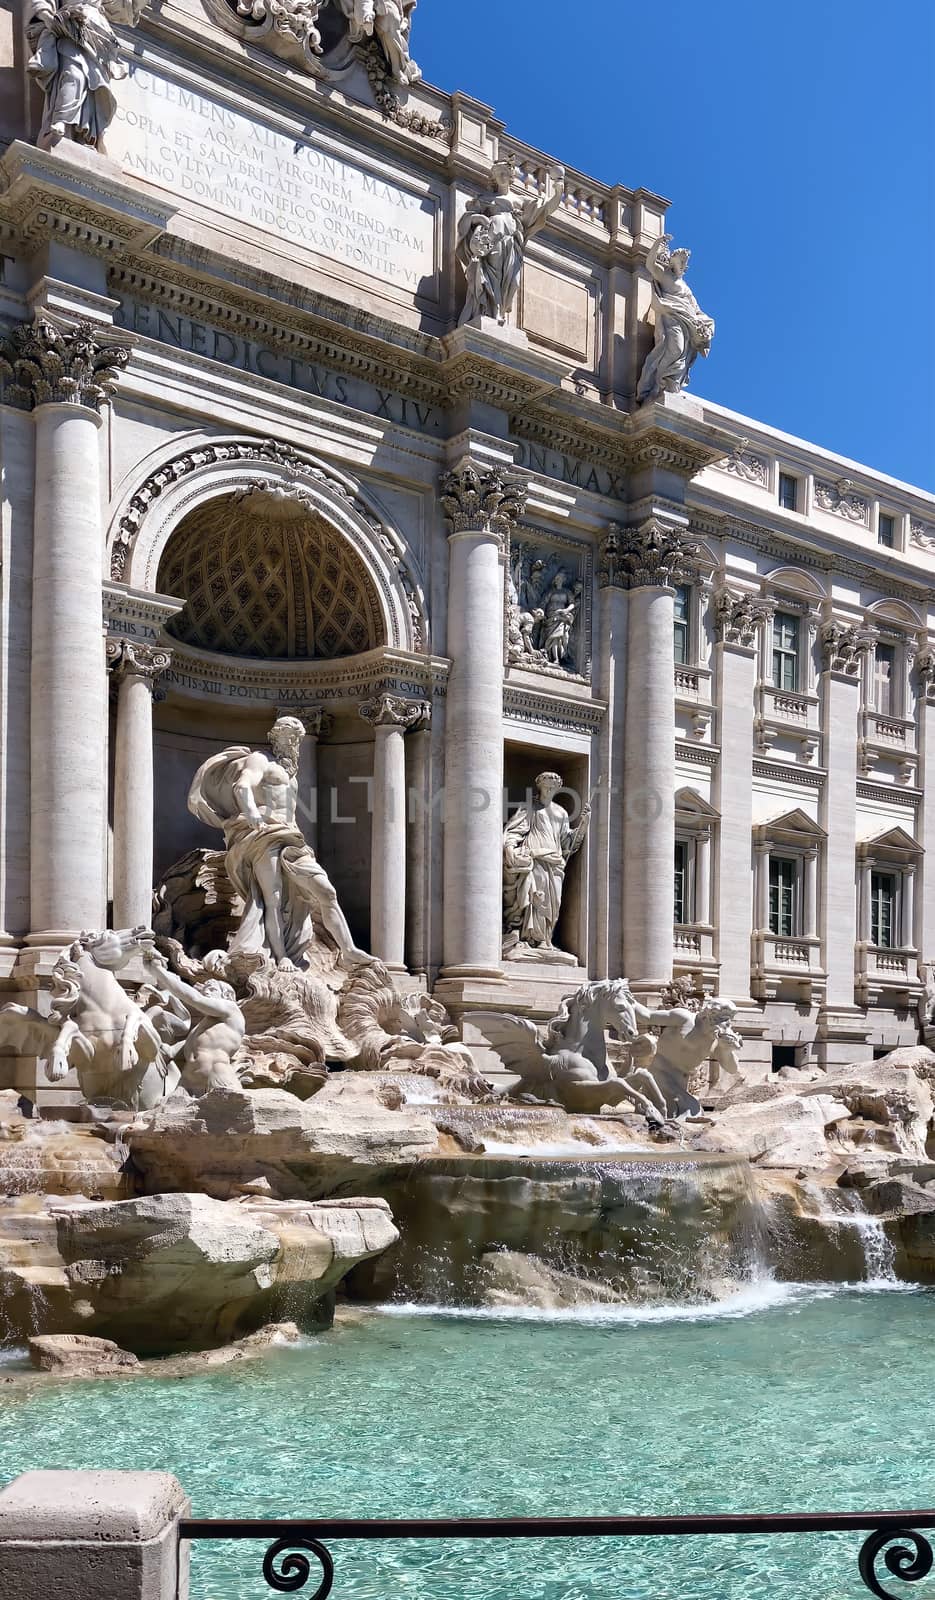 the facade of the Trevi Fountain in Rome, one of the main tourist attractions in Italy. by rarrarorro